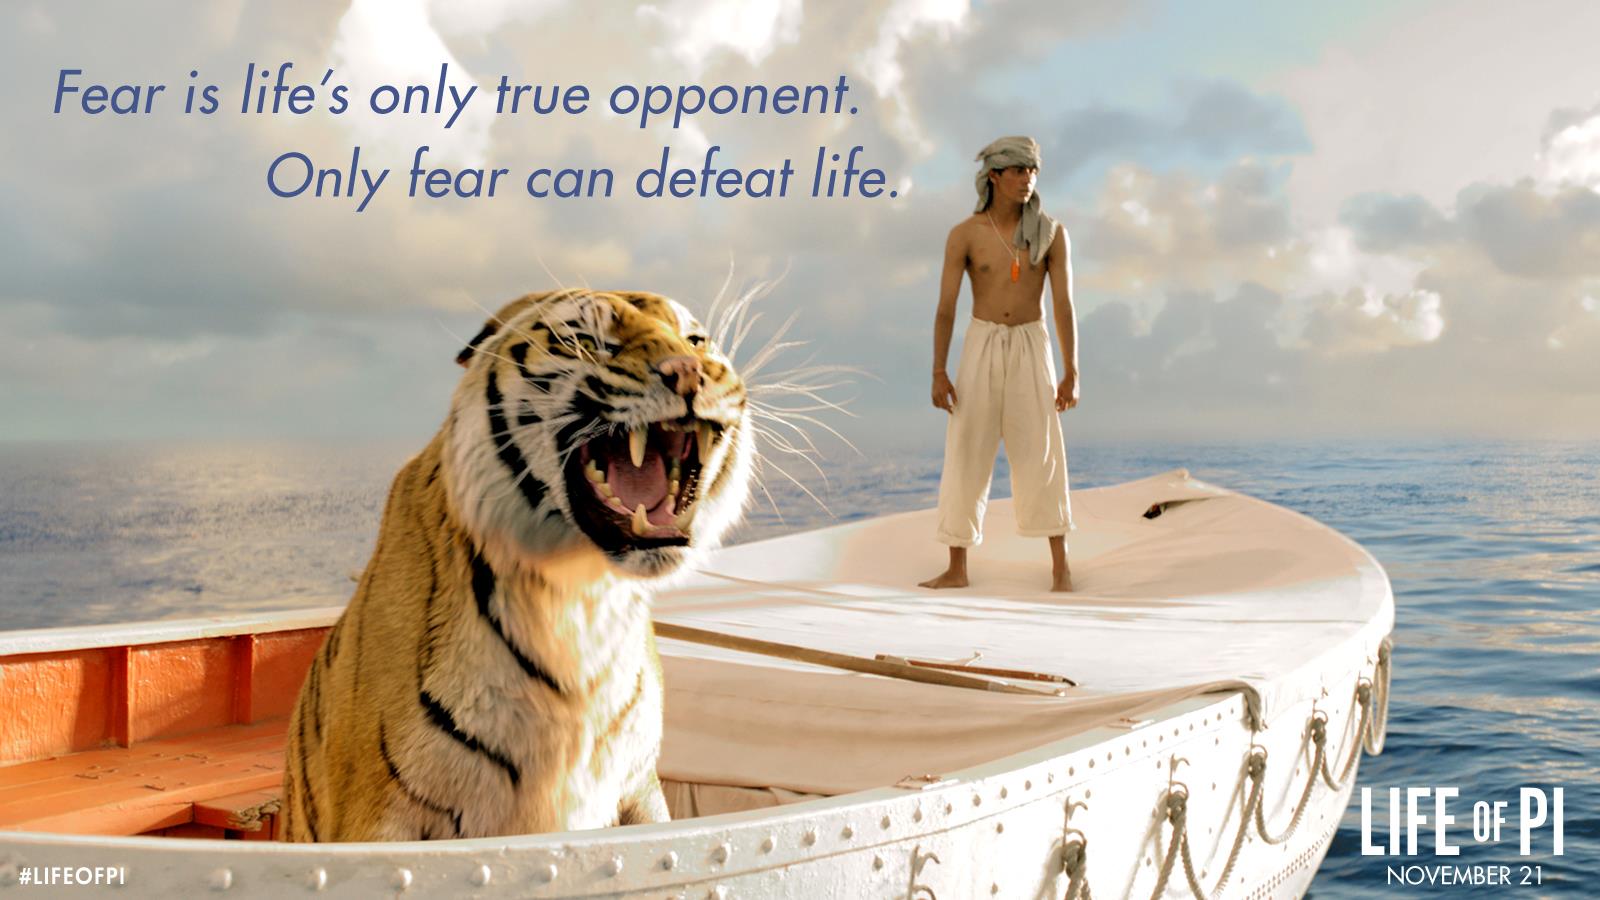 25 Life of Pi Quotes On Survival, Religion, and More (2022)